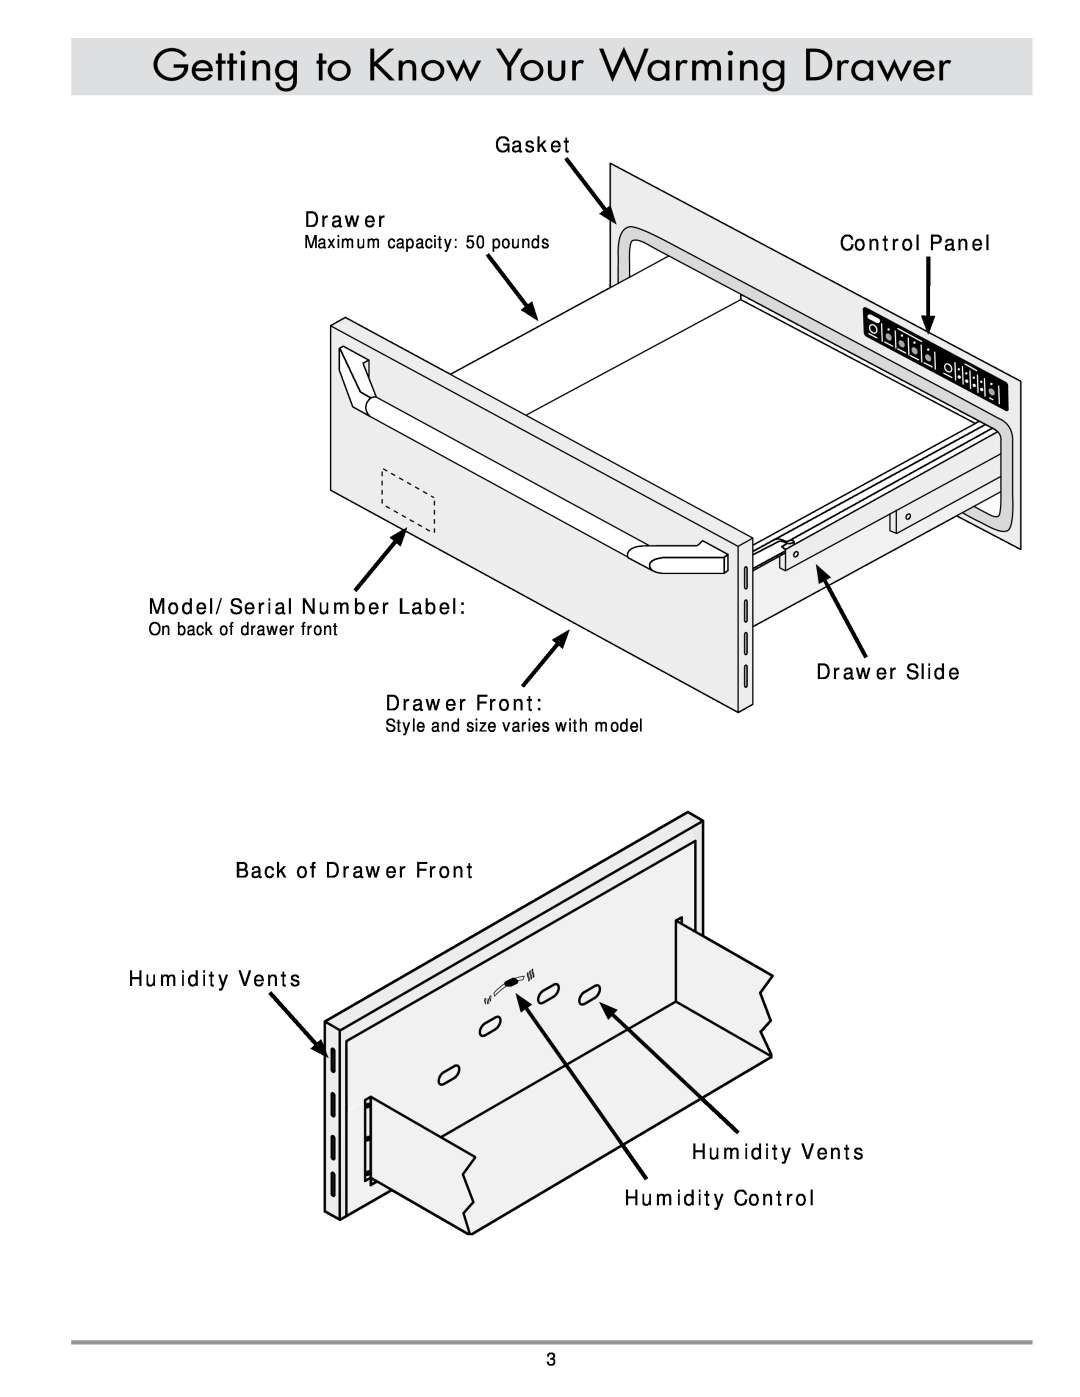 Dacor MRWD27, MRWD30 Getting to Know Your Warming Drawer, Gasket Drawer, Model/Serial Number Label, Drawer Front 